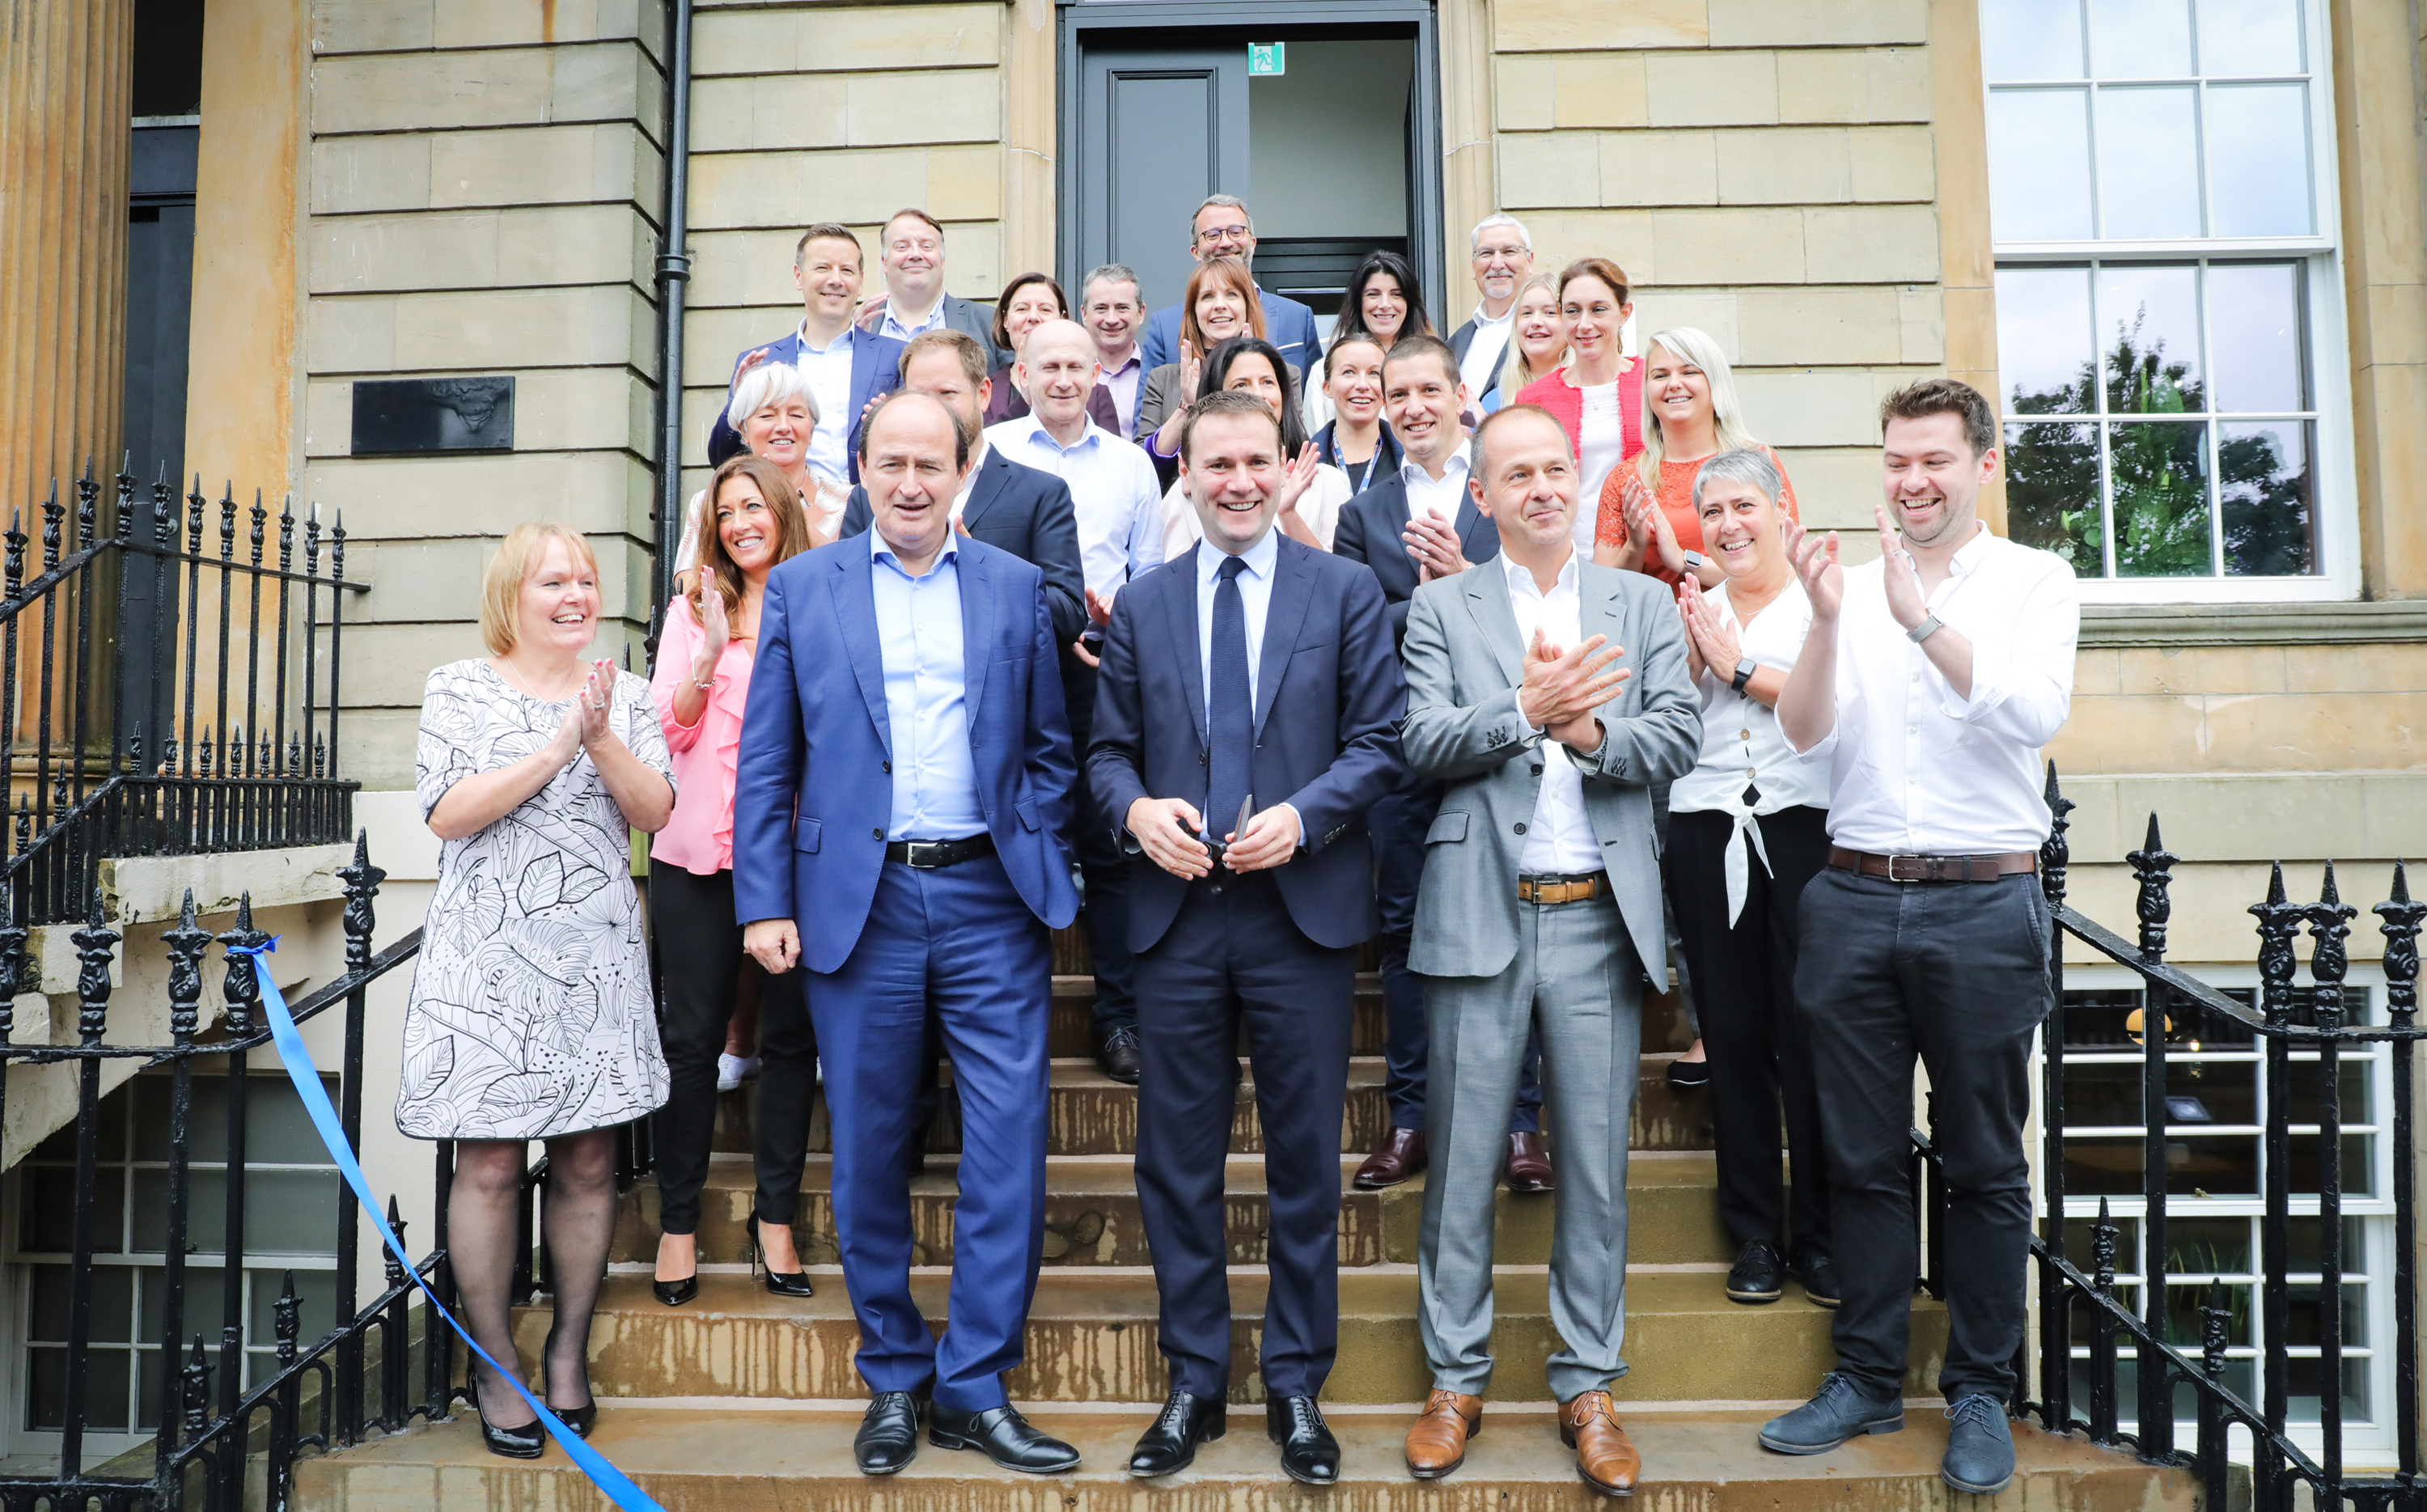 Chivas Brothers opens new head office in Glasgow